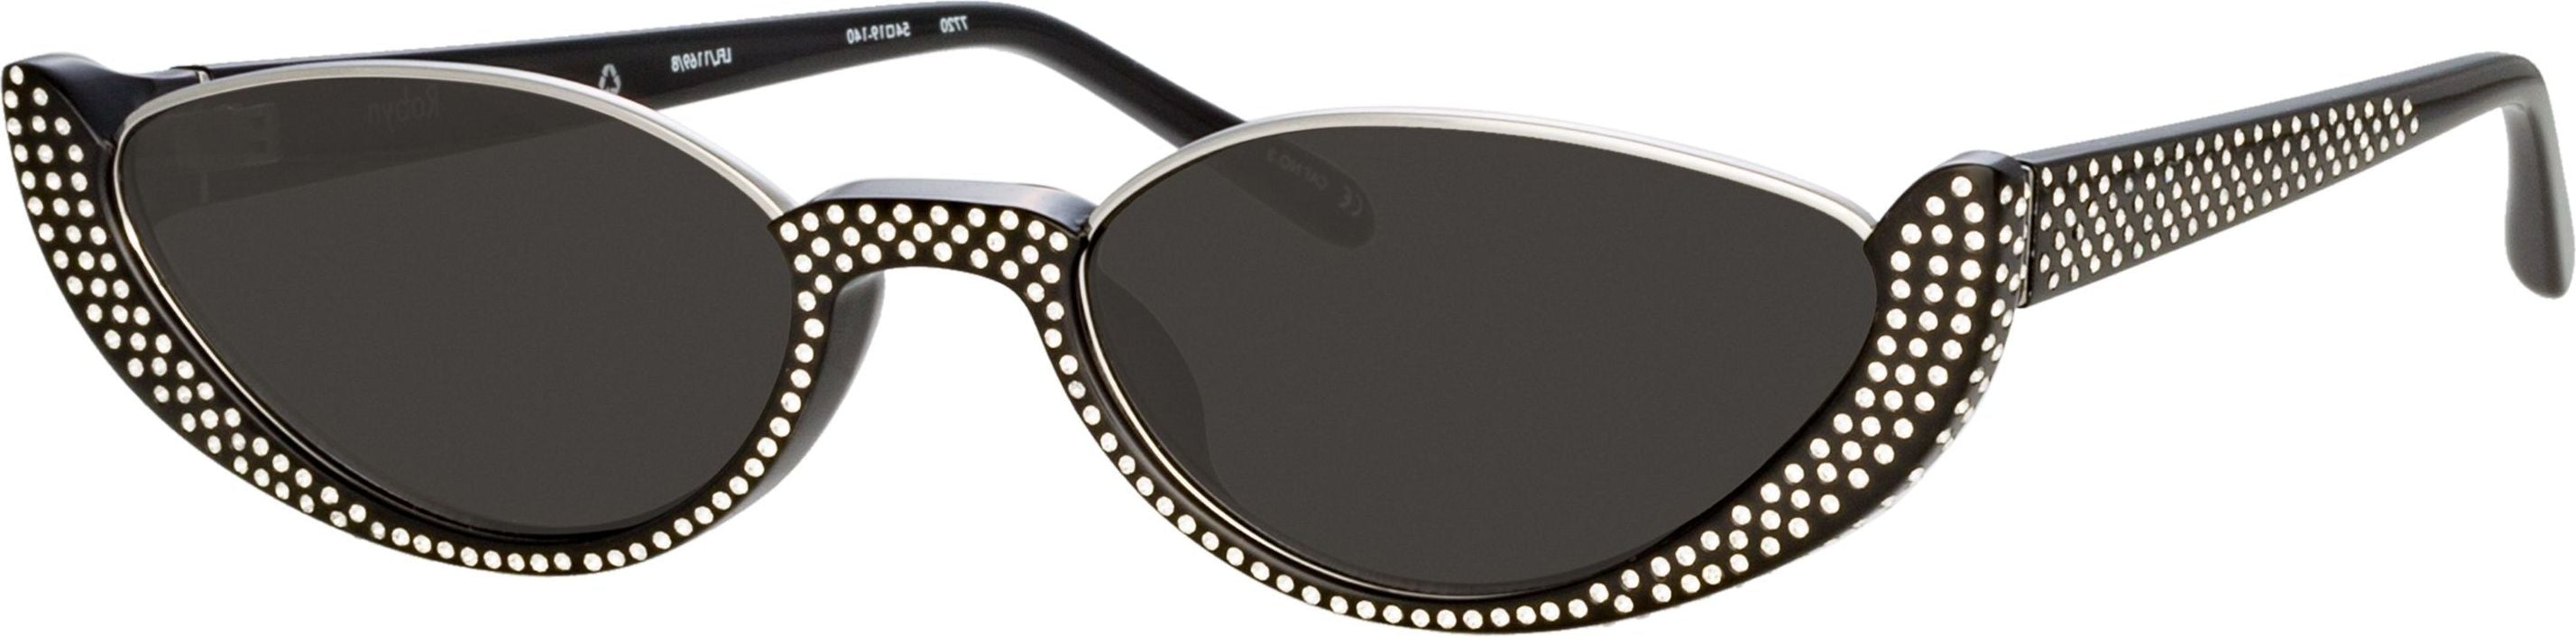 Color_LFL1169C8SUN - Robyn Cat Eye Sunglasses in Black and Crystal